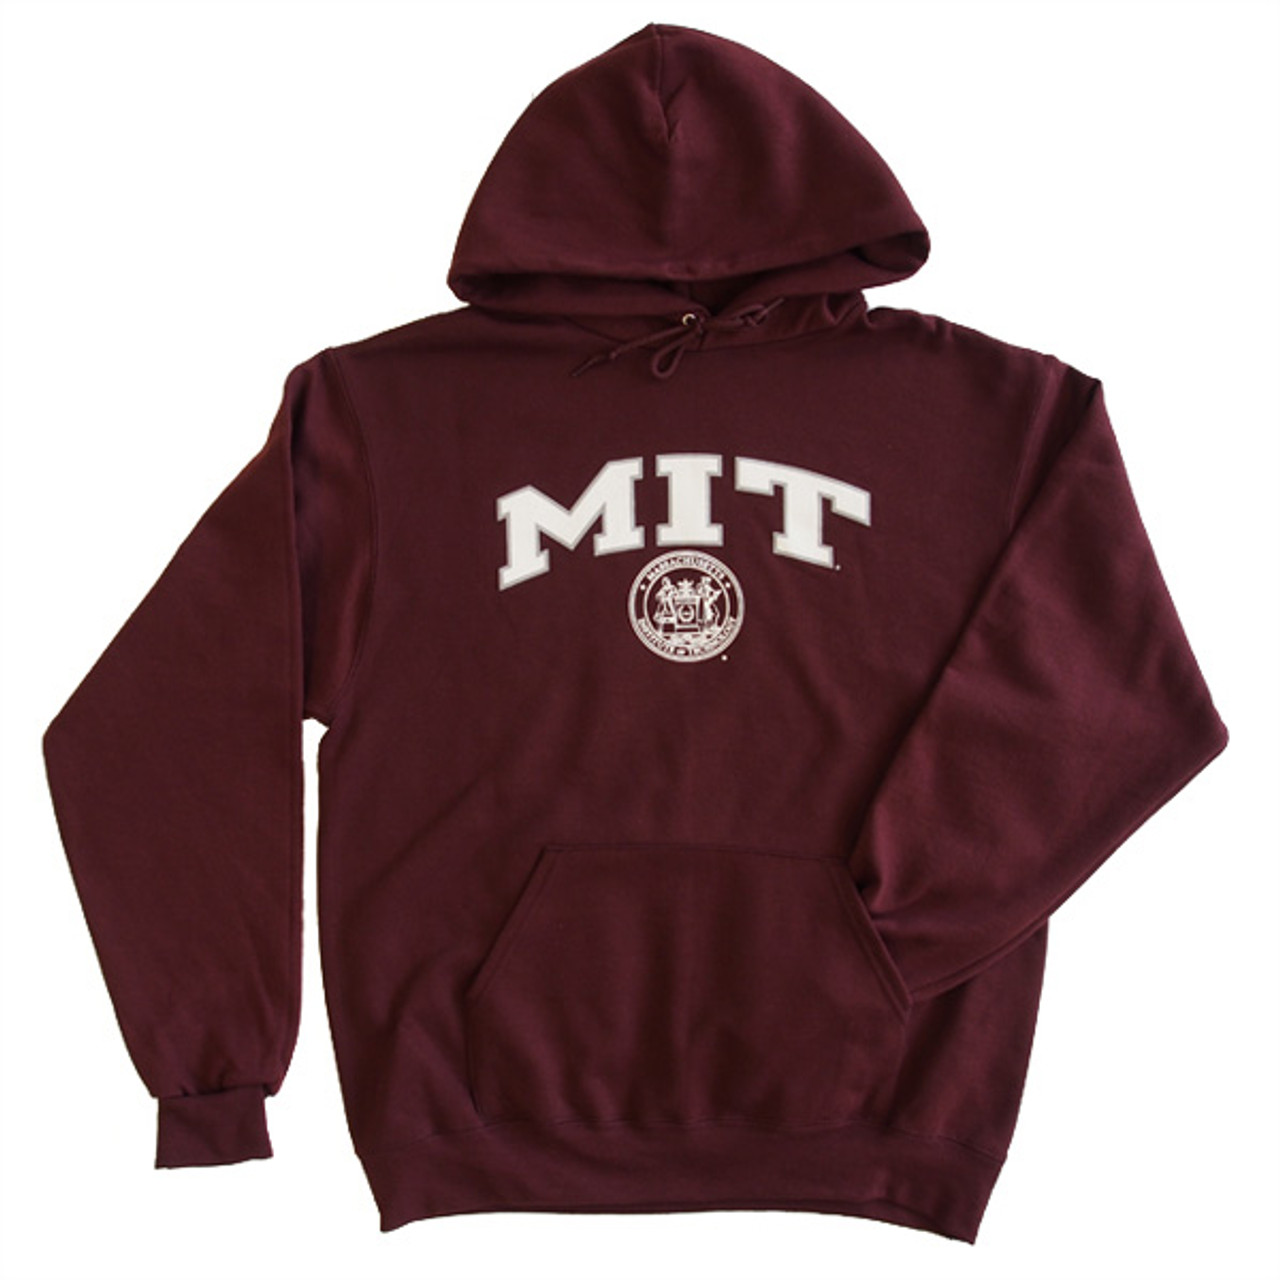 MIT hoodie seal and logo with